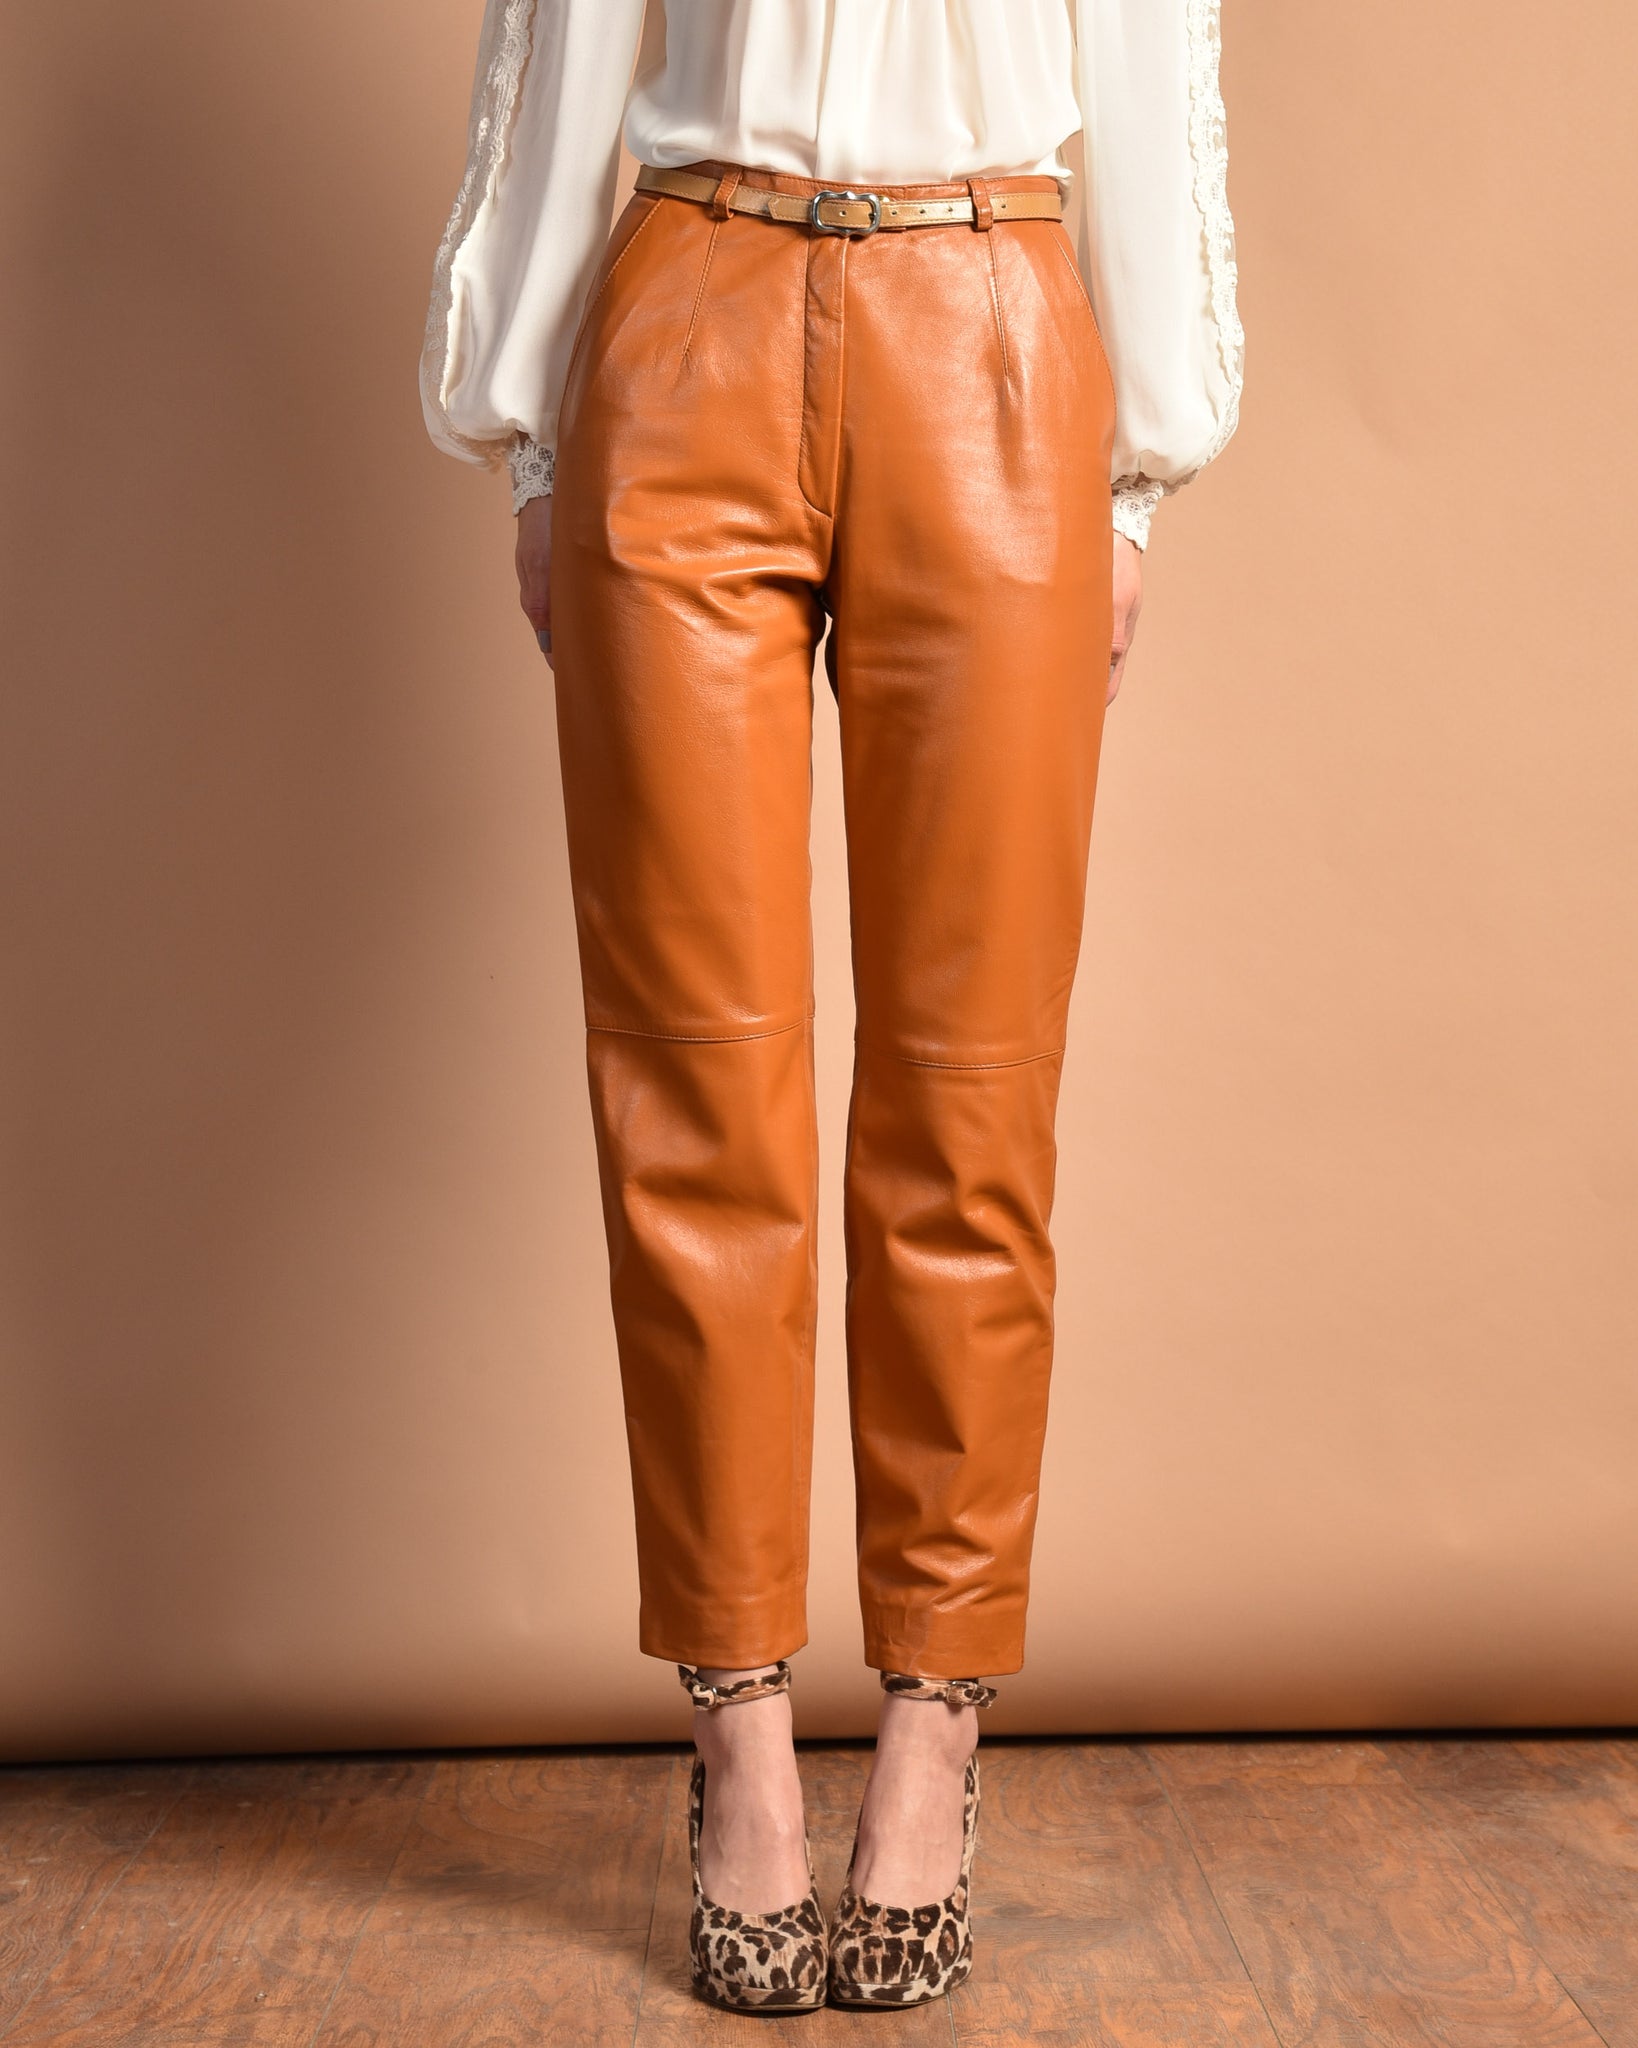 Vintage Suede Pants 1980s Tan Leather Pants Tapered High Waist